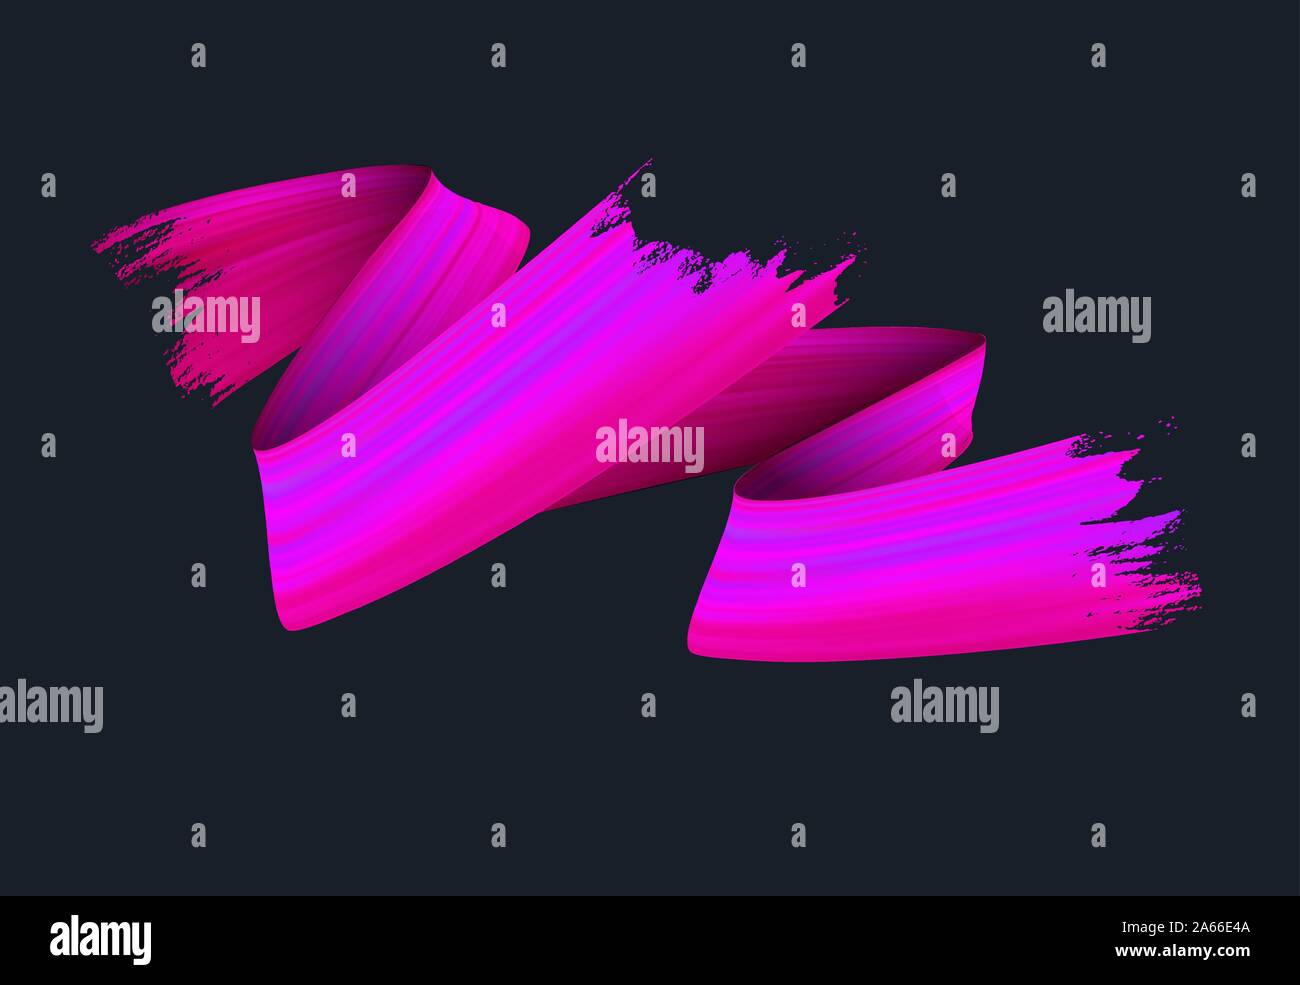 Freehand paint brush stroke realistic illustration. Flamboyant acrylic paint zig zag smears isolated on black background. Grunge style texture with metallic glow and pink color gradient effect Stock Vector